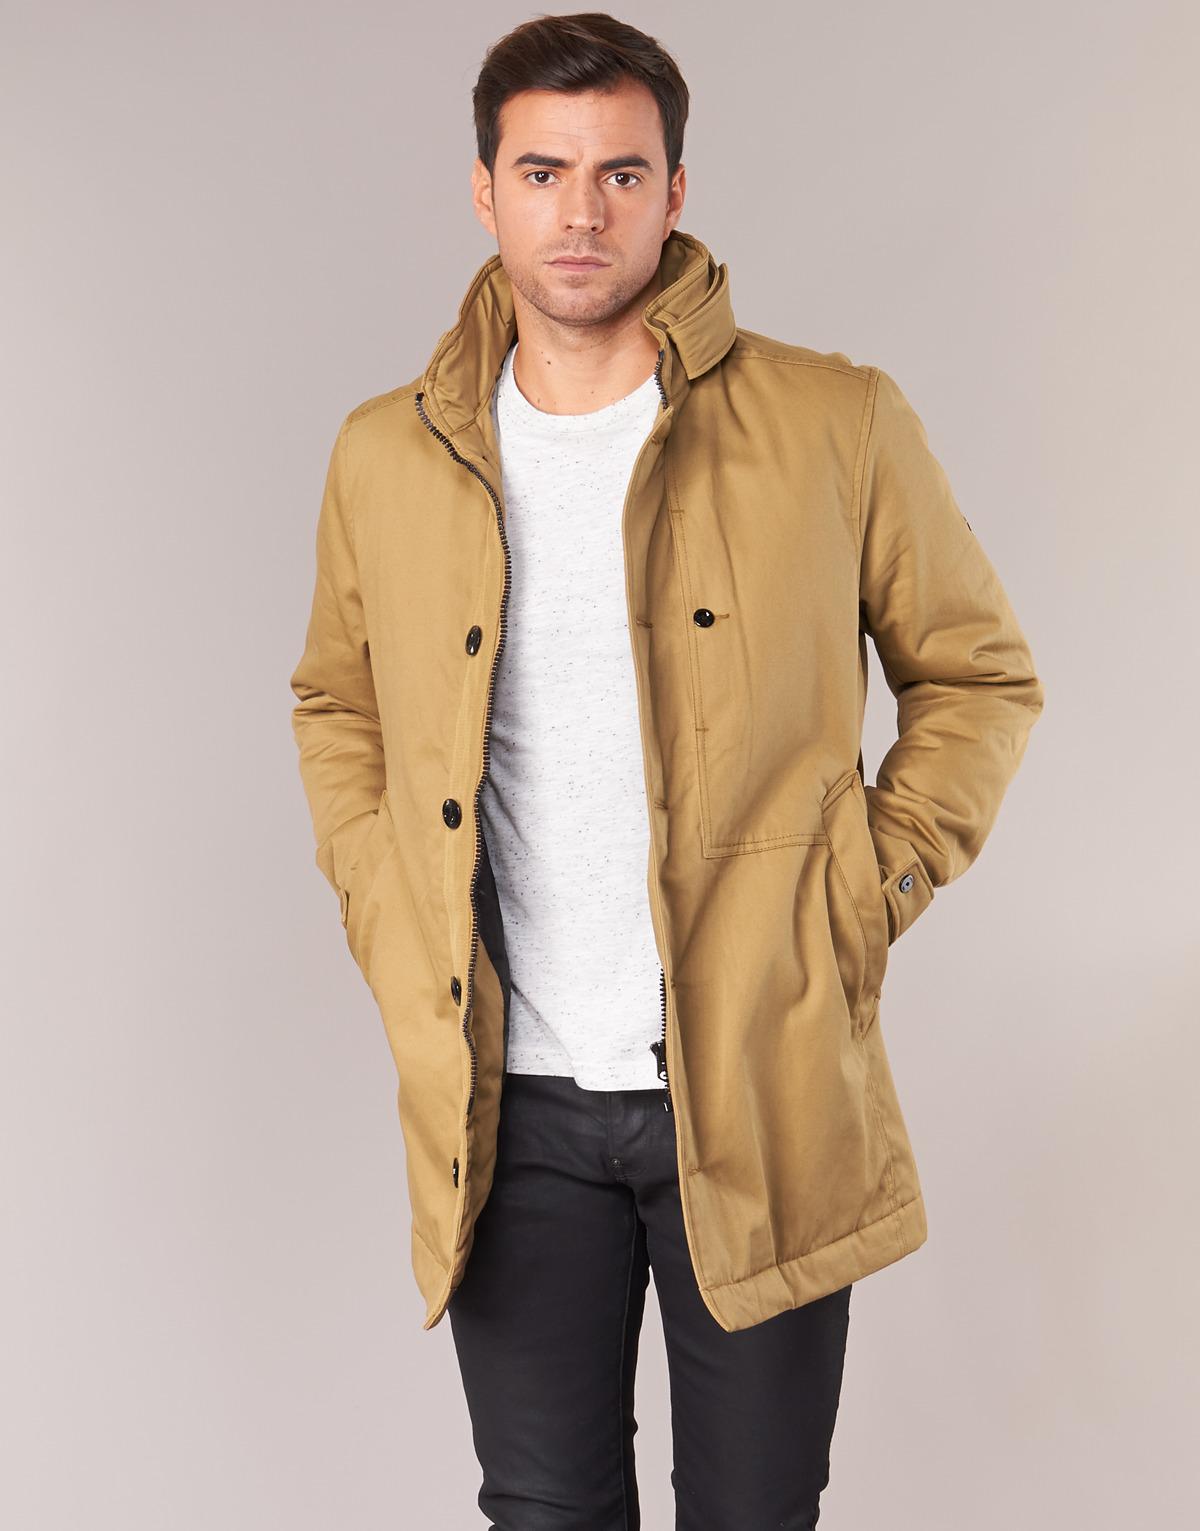 g star garber trench coat,Quality assurance,protein-burger.com